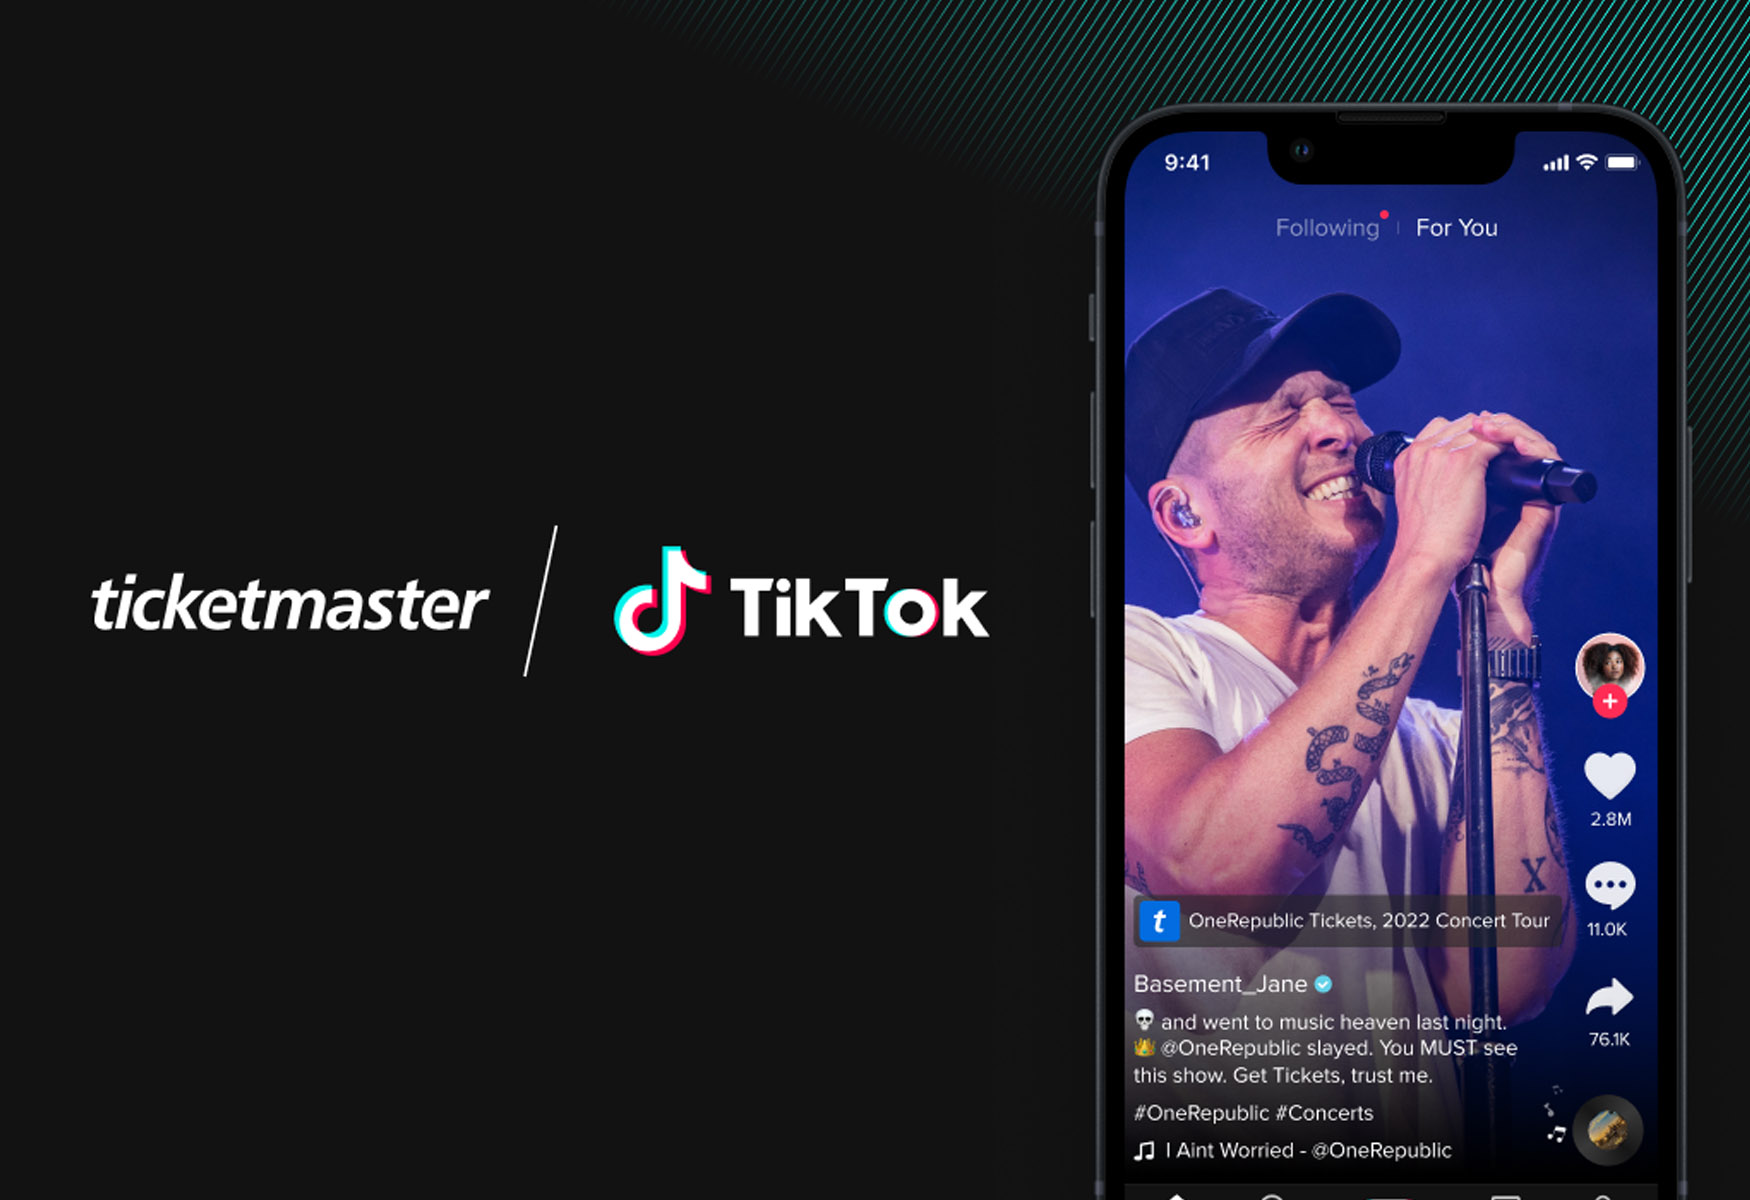 tiktok-expands-in-app-ticketmaster-ticketing-feature-to-20-countries